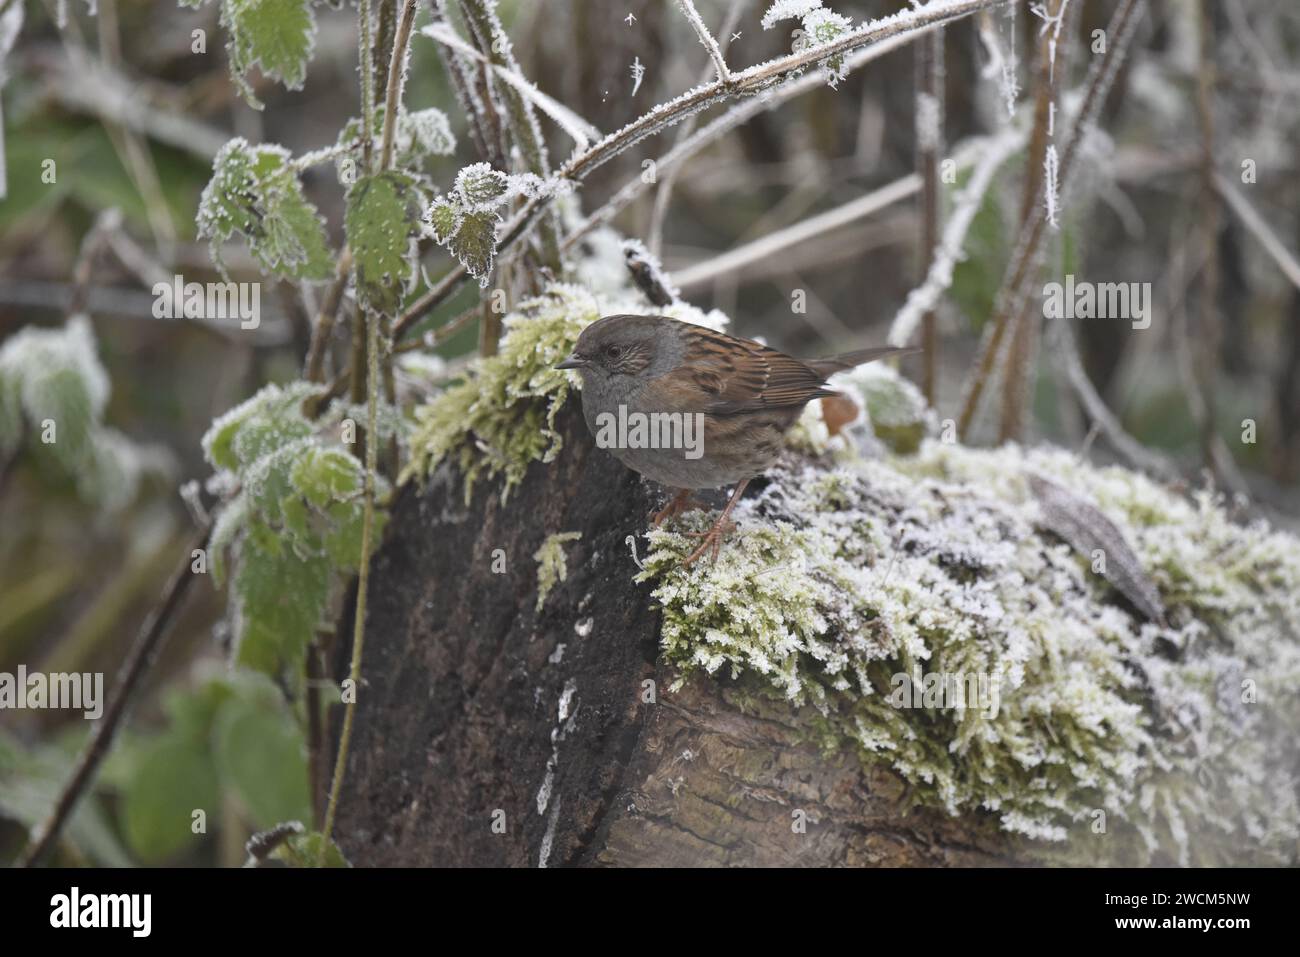 Dunnock (Prunella modularis) Perched in Left-Profile, Middle of Image, on Top of Frost Covered Moss on a Log, against a Frosty Woodland Background Stock Photo